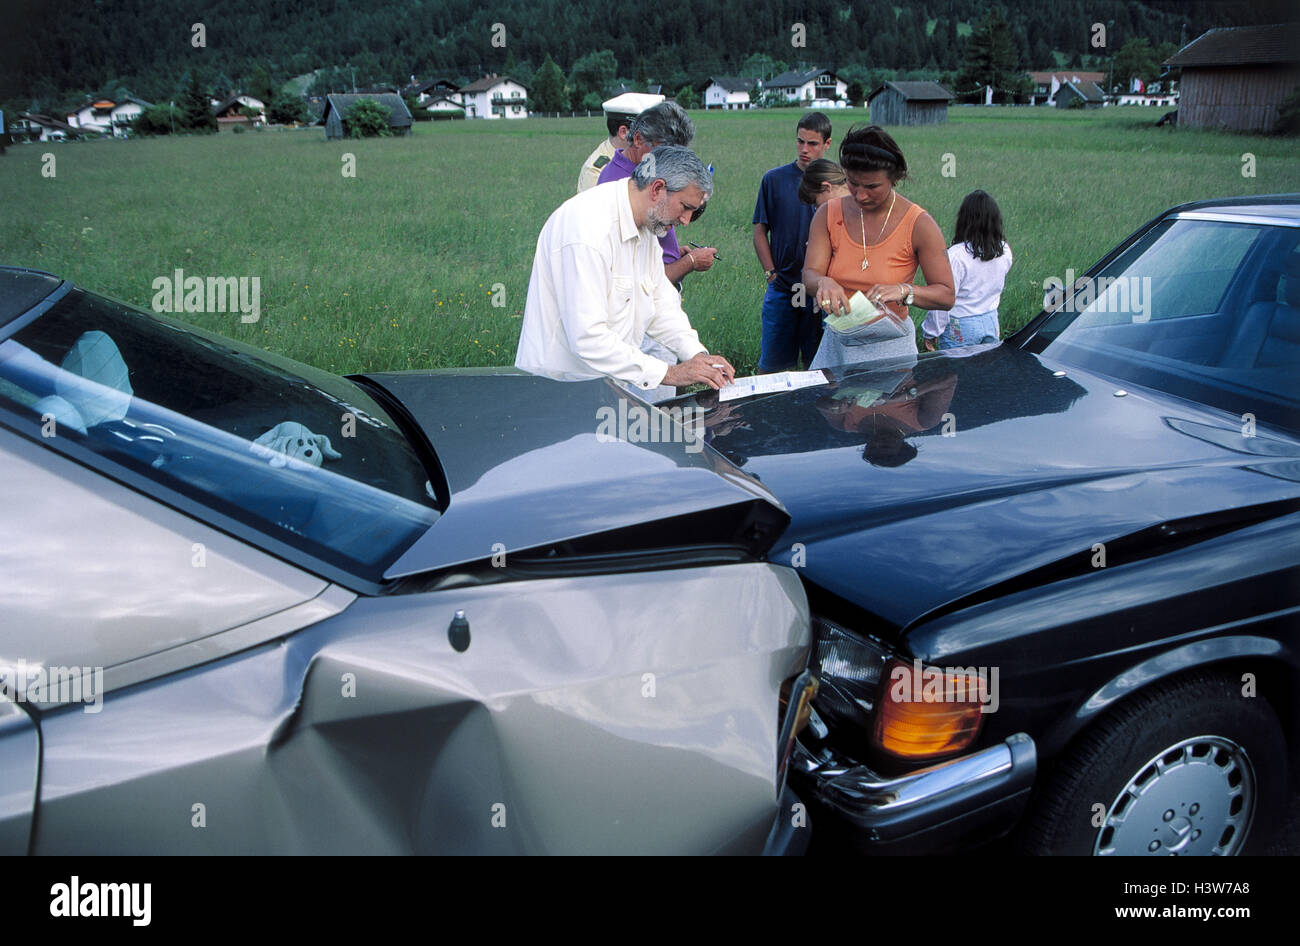 Street, traffic accident, damage to the bodywork, police, people involved, protocol family, driver, policeman, accident protocol, write, accident, street, car accident, personal details, clarification, accident cause, collision, damage to the bodywork Stock Photo